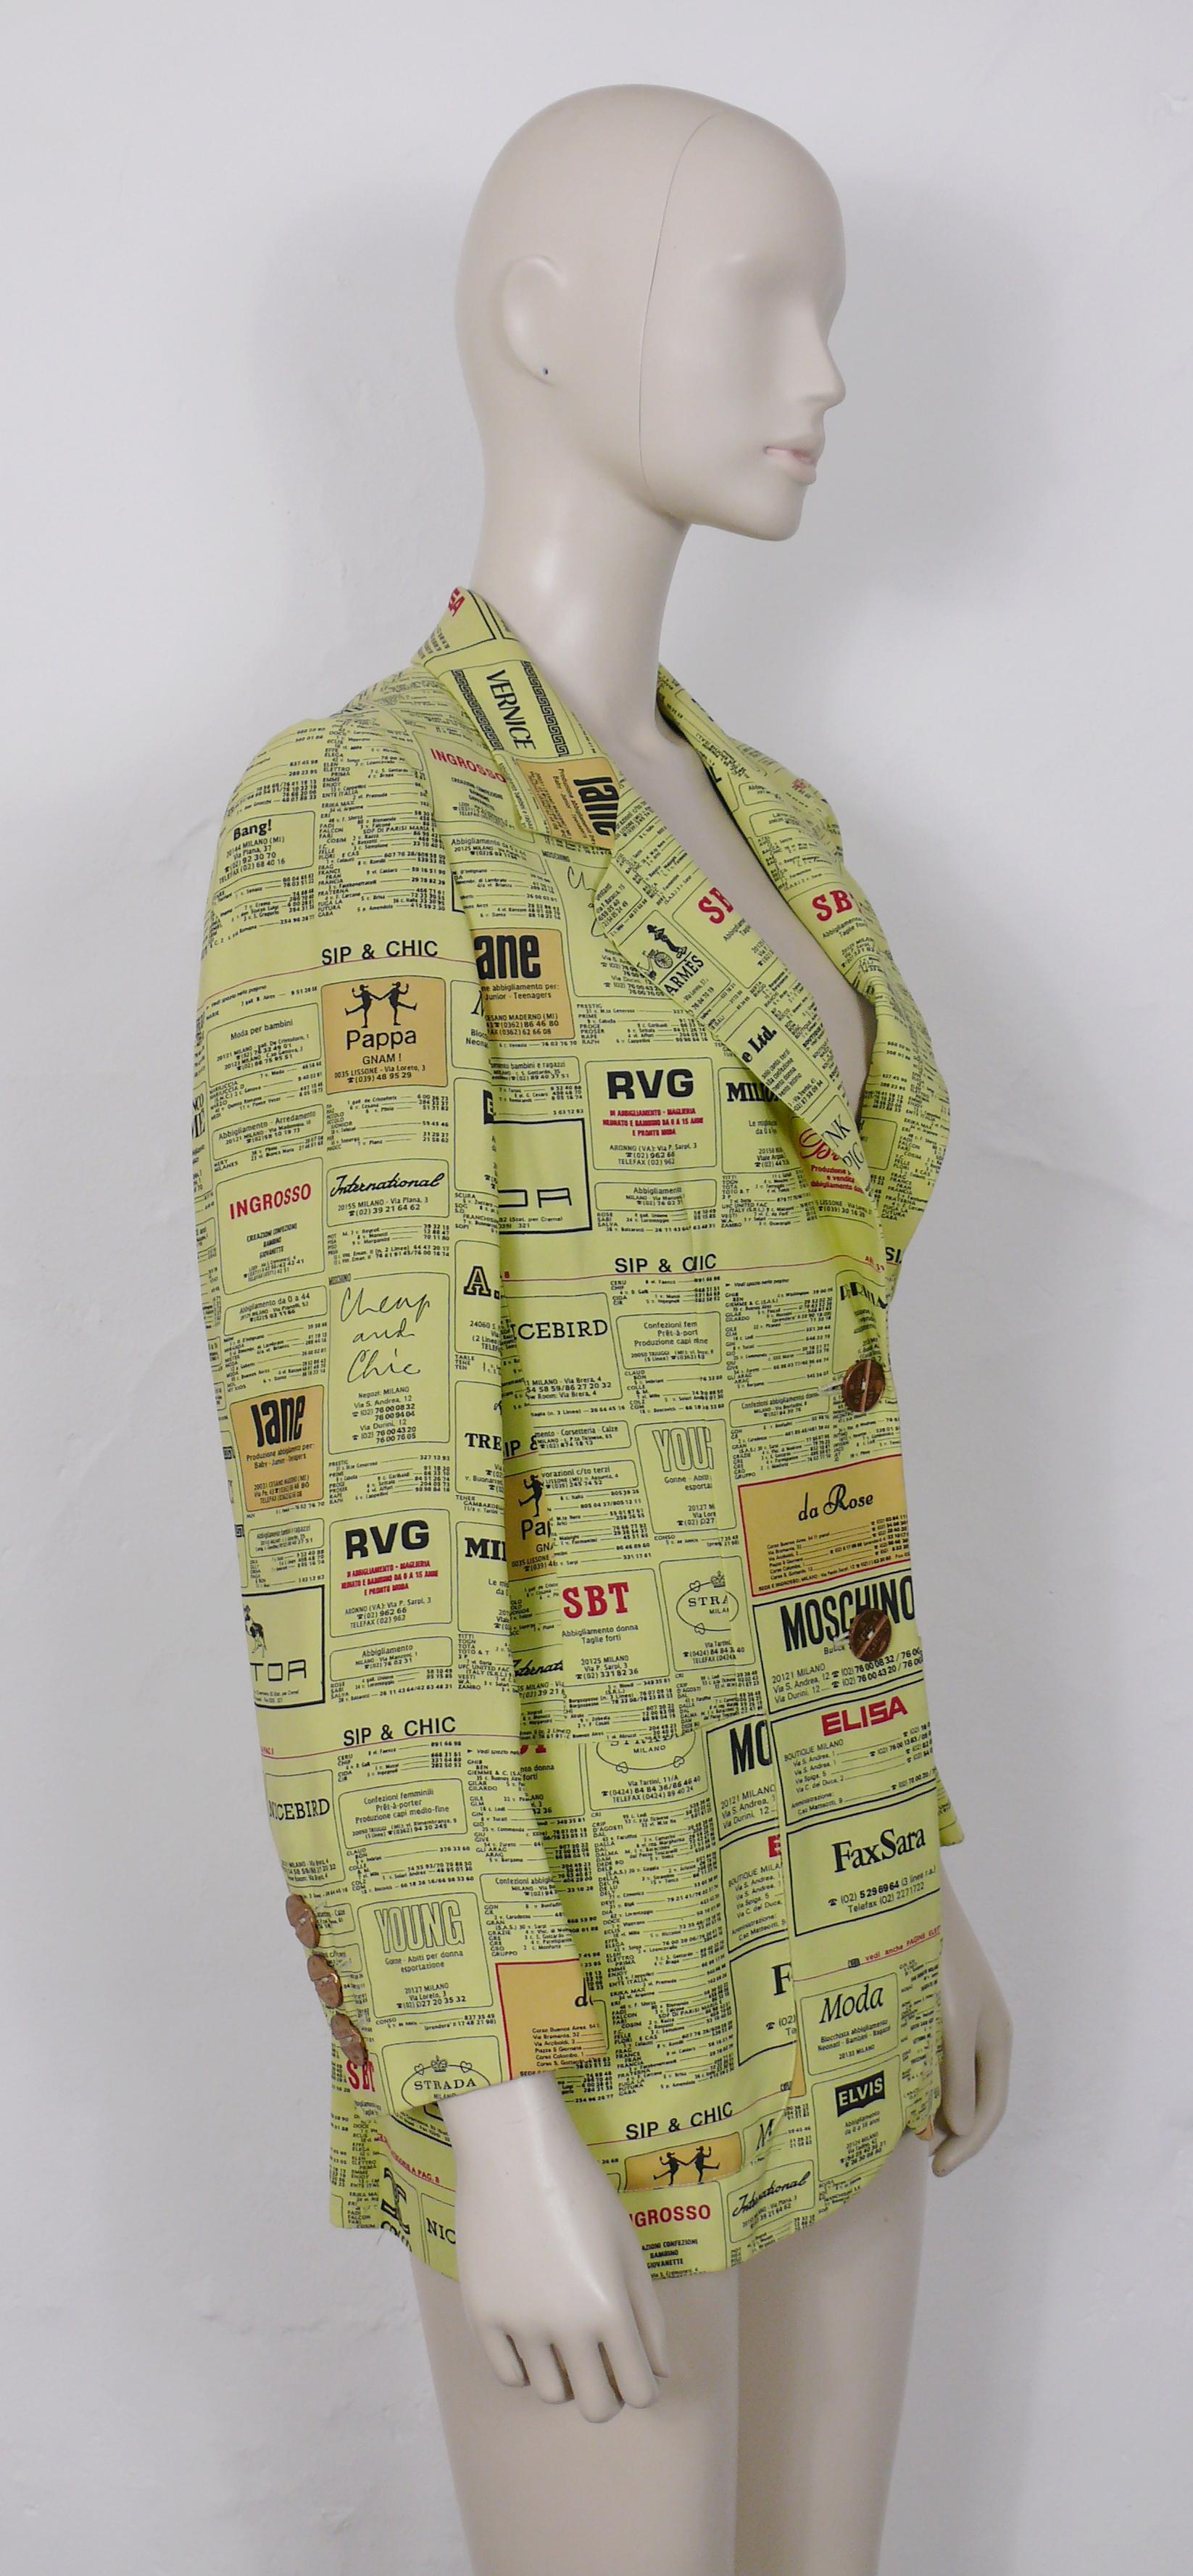 MOSCHINO vintage printed Yellow Pages jacket.

This jacket features advertsing pages from the Milan telephone directory with logos of fashion houses such as HERMES (here CHARMES) and MAX MARA (which appears as FAX SARA)... Buttons are crafted from